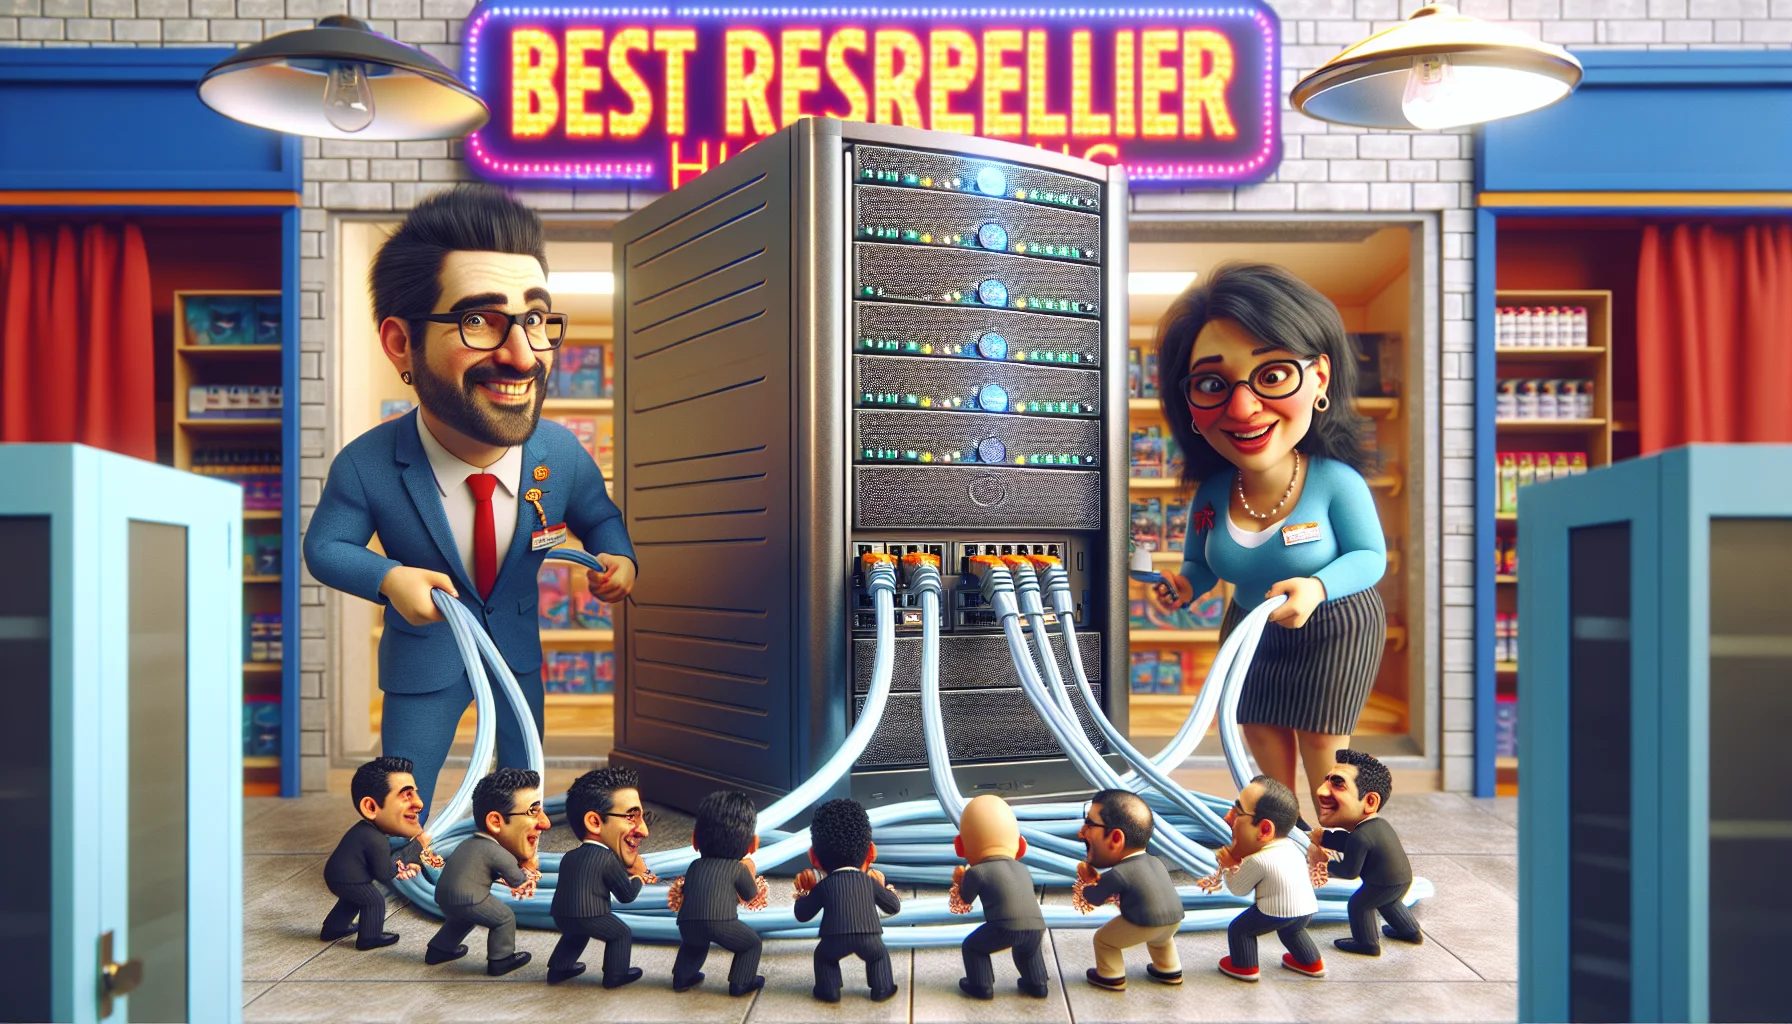 Create an image showcasing a comical scenario in the world of reseller web hosting. In this comedic scene, imagine an oversize computer server, gleaming silver and covered in blinking lights in a whimsical retail shop setting. A group of animated characters, Caucasian male with a beard, Hispanic female with glasses, and Middle-eastern male with short hair are all dressed in professional attire, each holding oversized ethernet cables as leashes leading to tiny, anthropomorphic website icons that are clamoring to jump into the server. Position a brightly colored sign in the background saying 'Best Reseller Hosting' commanded by a South Asian Female Shopkeeper having a light-hearted laugh.